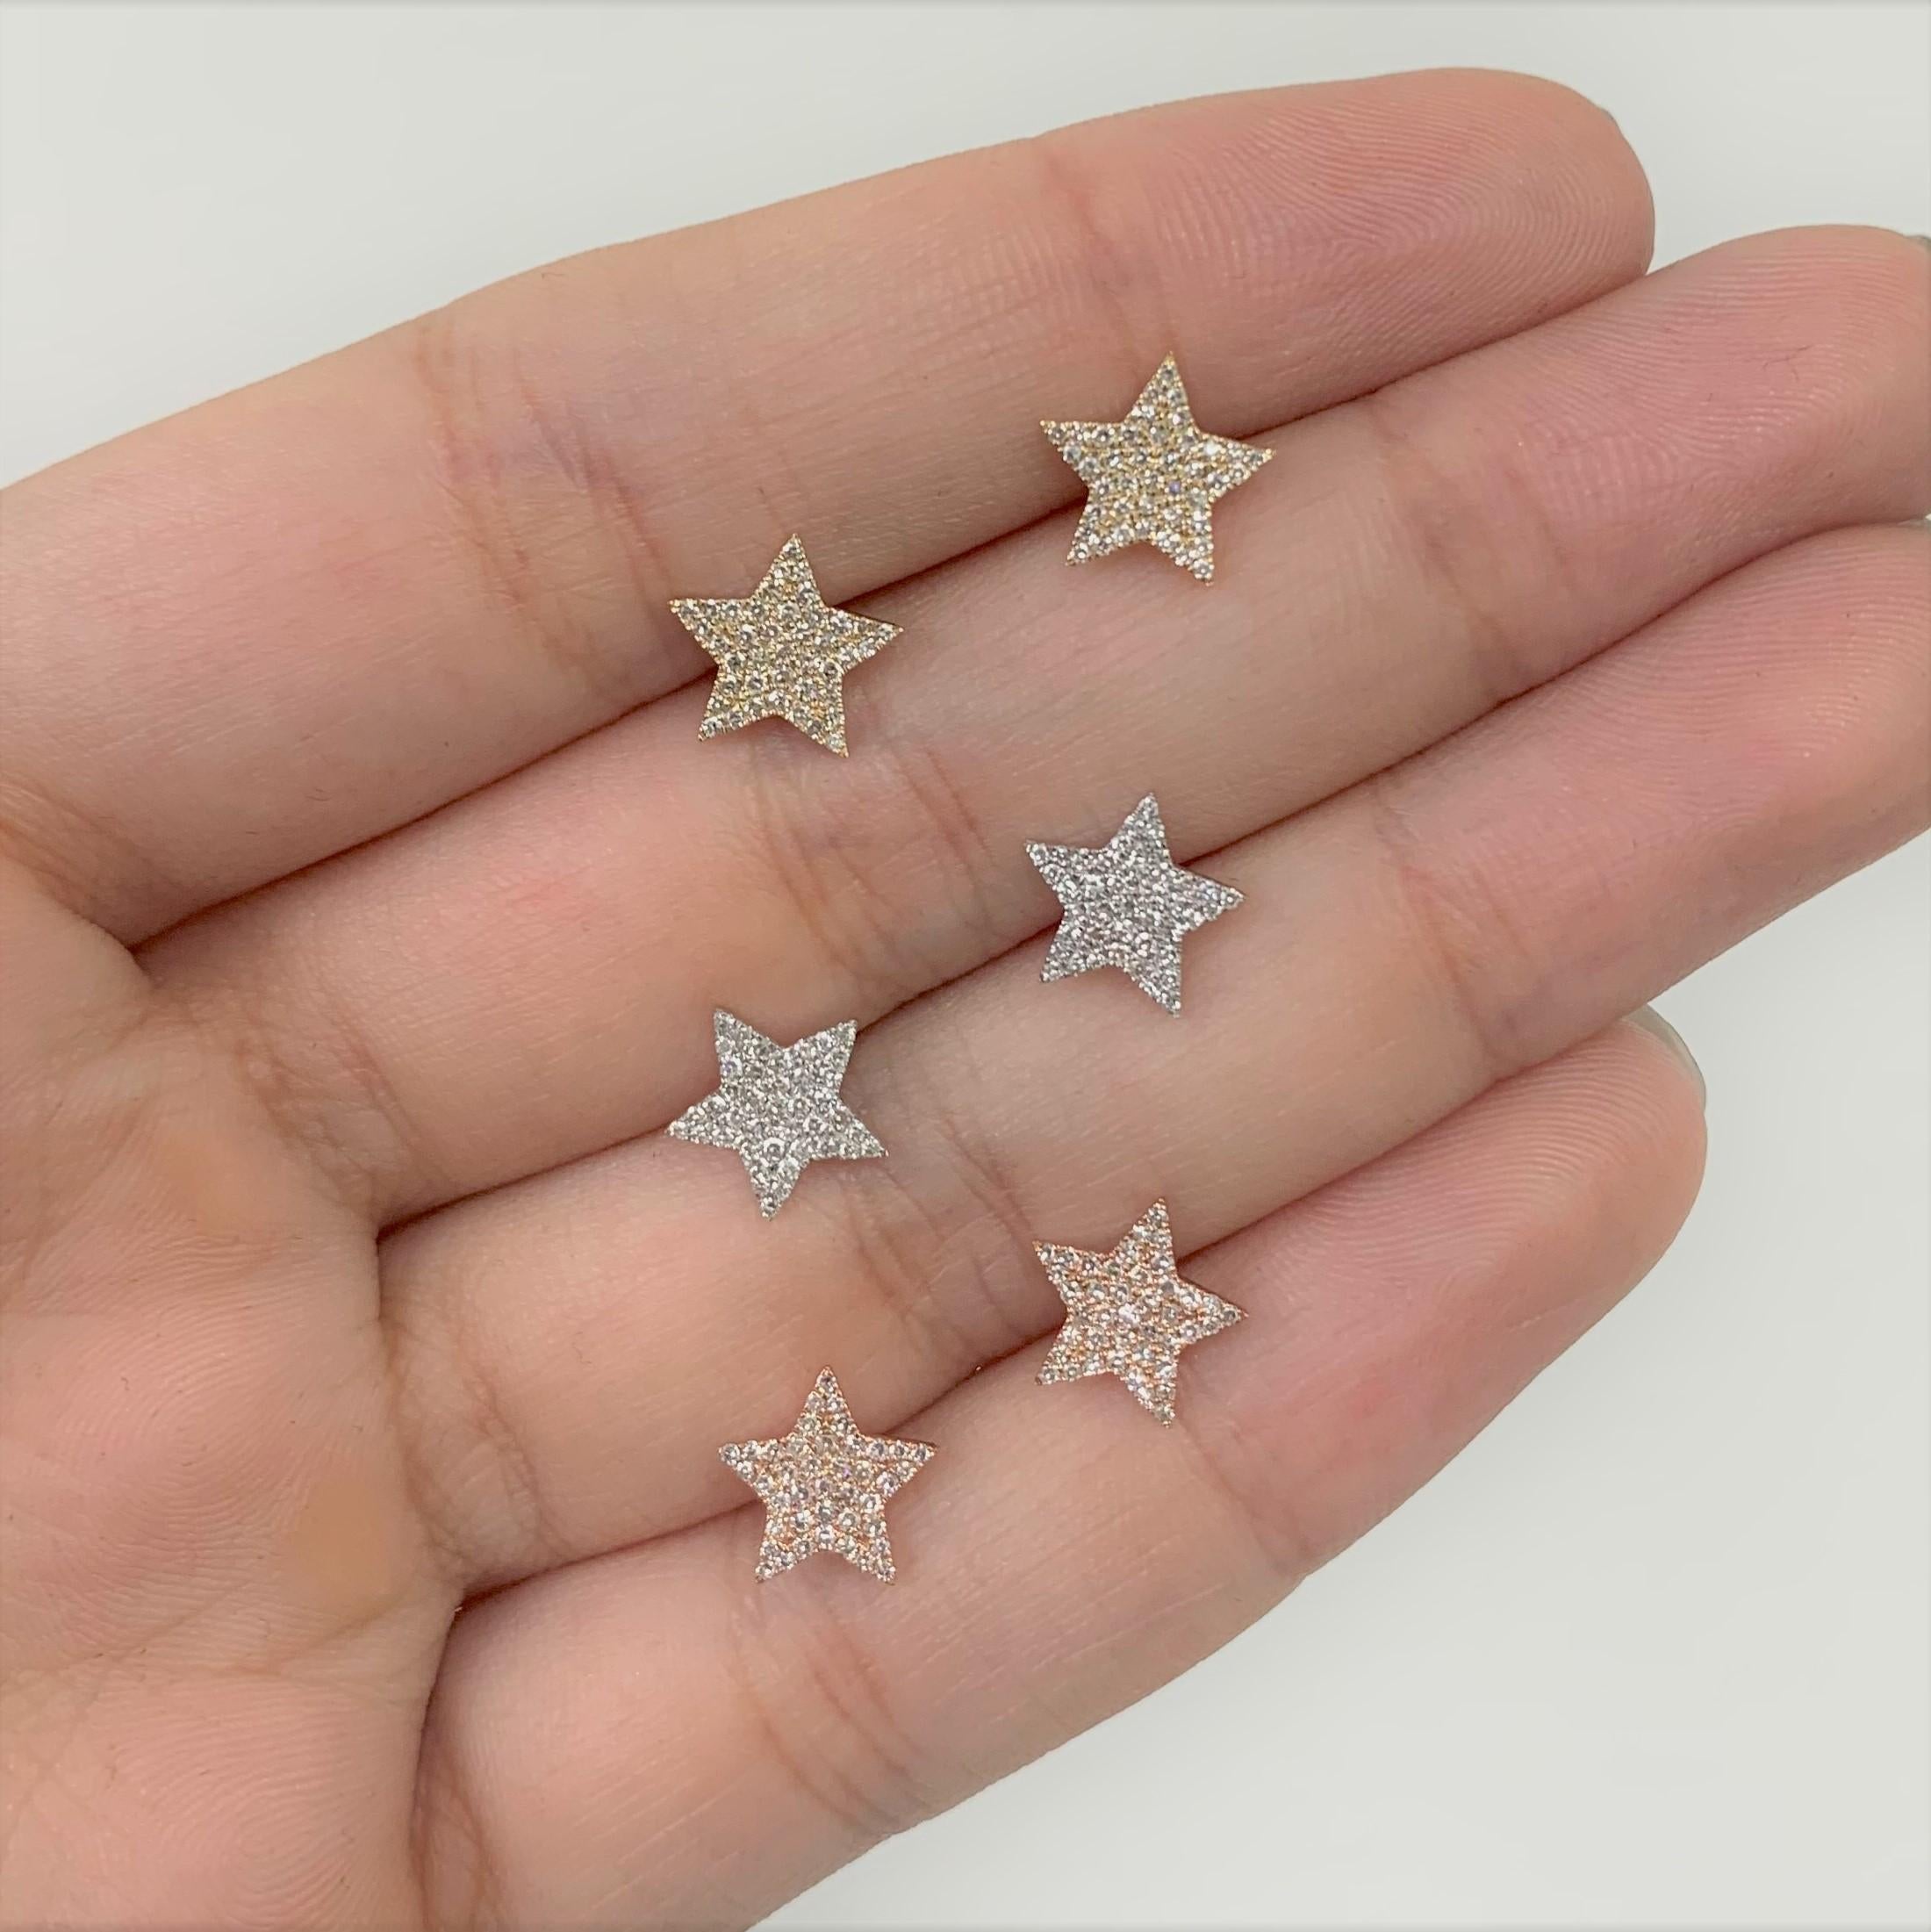 These star-shaped 14k Gold earrings feature approximately 0.21ct of sparkling white diamonds in pave settings and a high polish finish. Butterfly push-backs secure these 14-karat white, yellow or rose gold studs. Diamond color and Clarity GH SI1-SI2